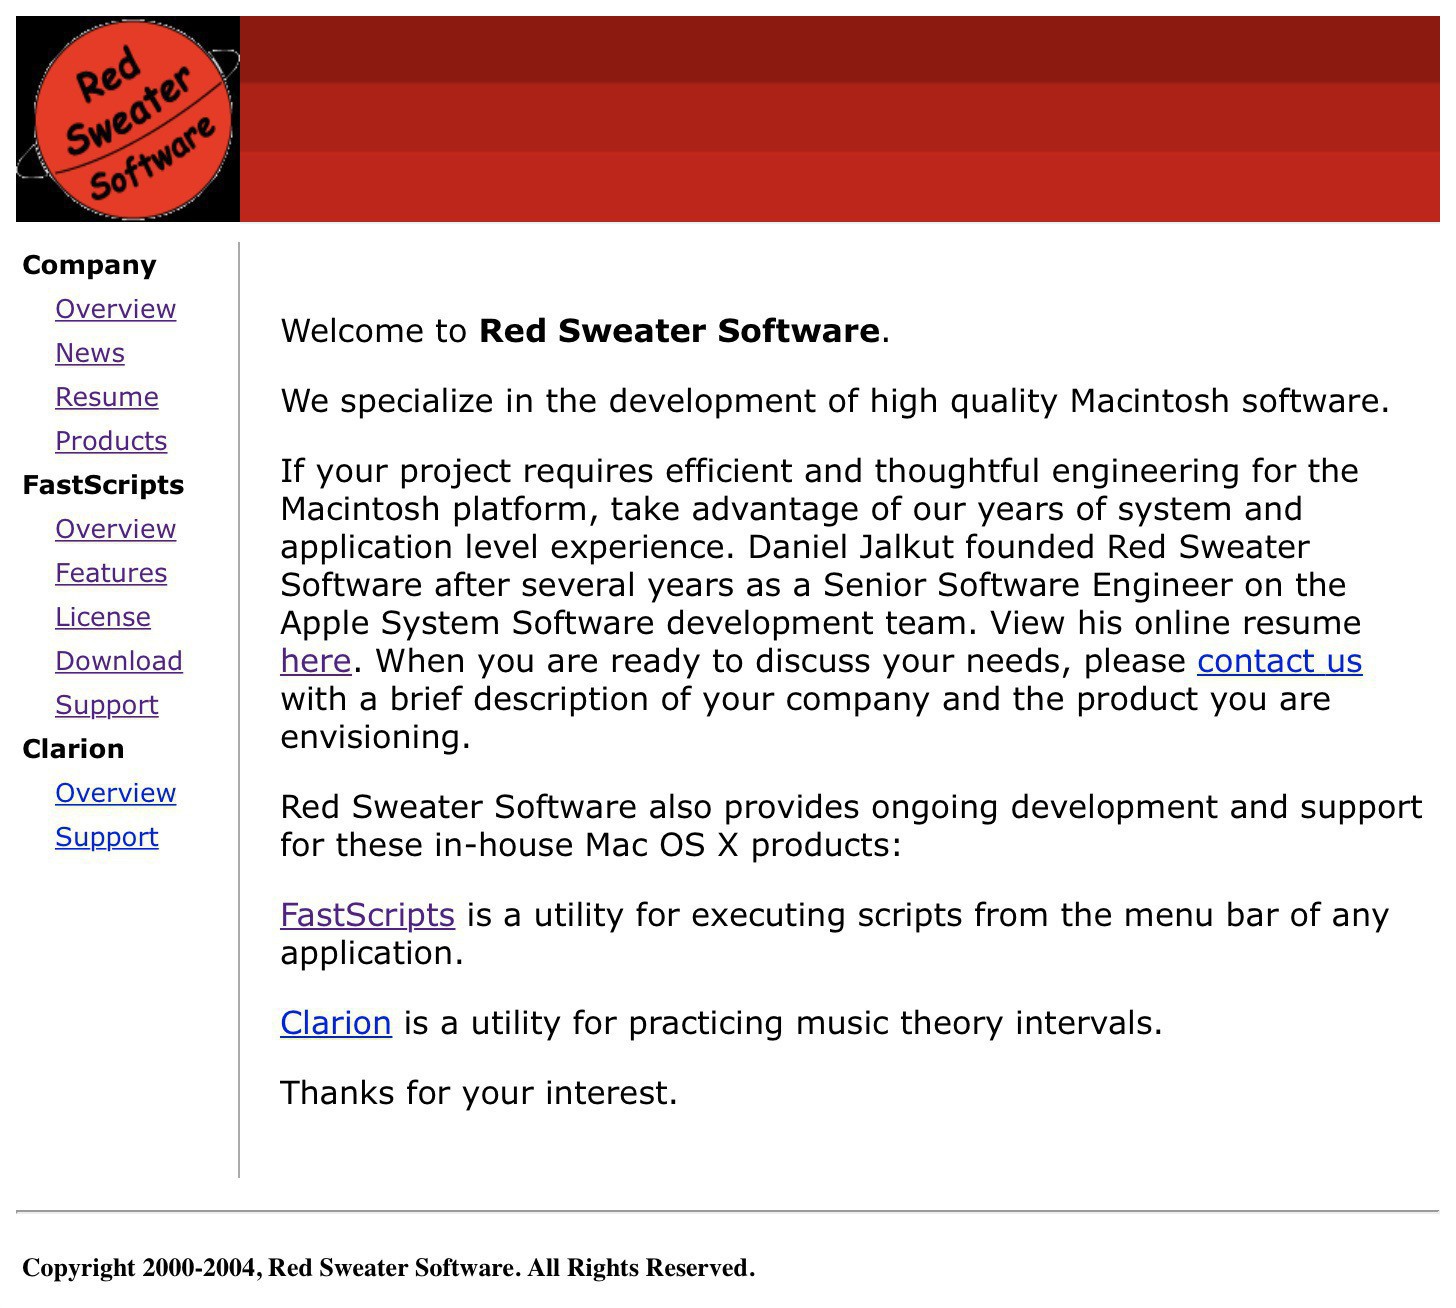 Screen capture of the Red Sweater home page as it appeared in 2004, featuring a "red planet" logo.